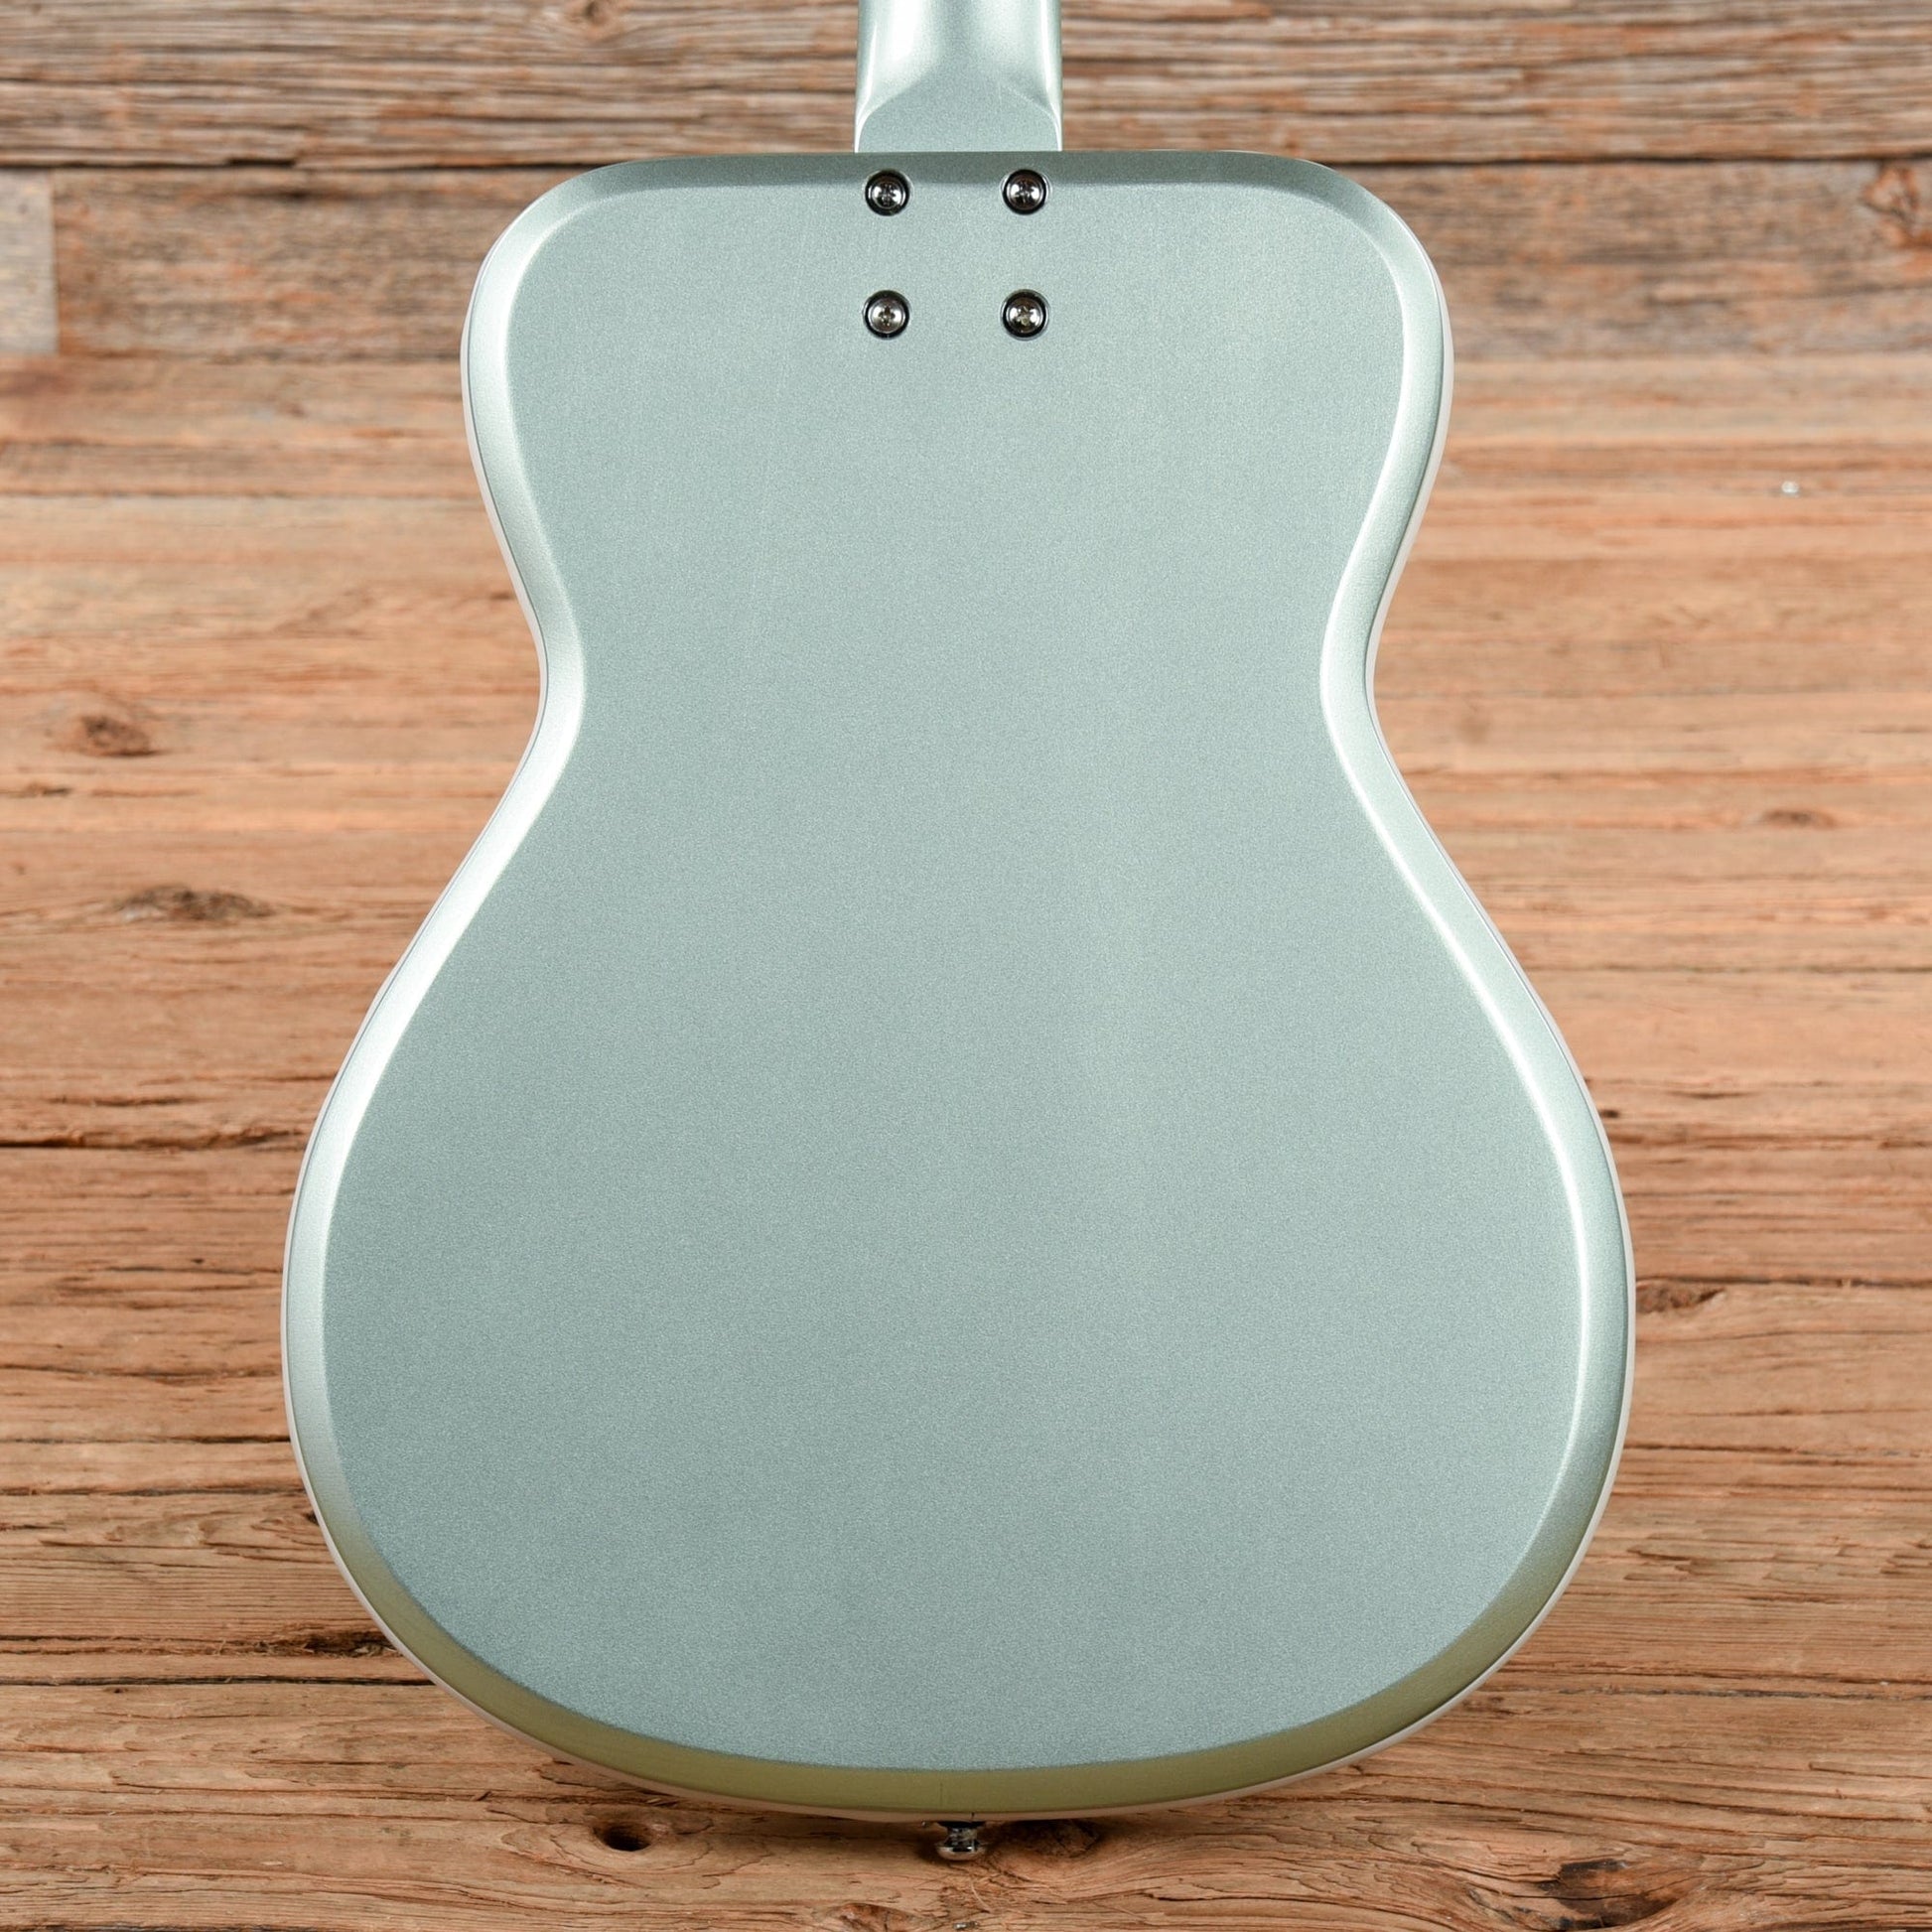 Eastwood Airline Folkstar Ice Blue Metallic Electric Guitars / Hollow Body